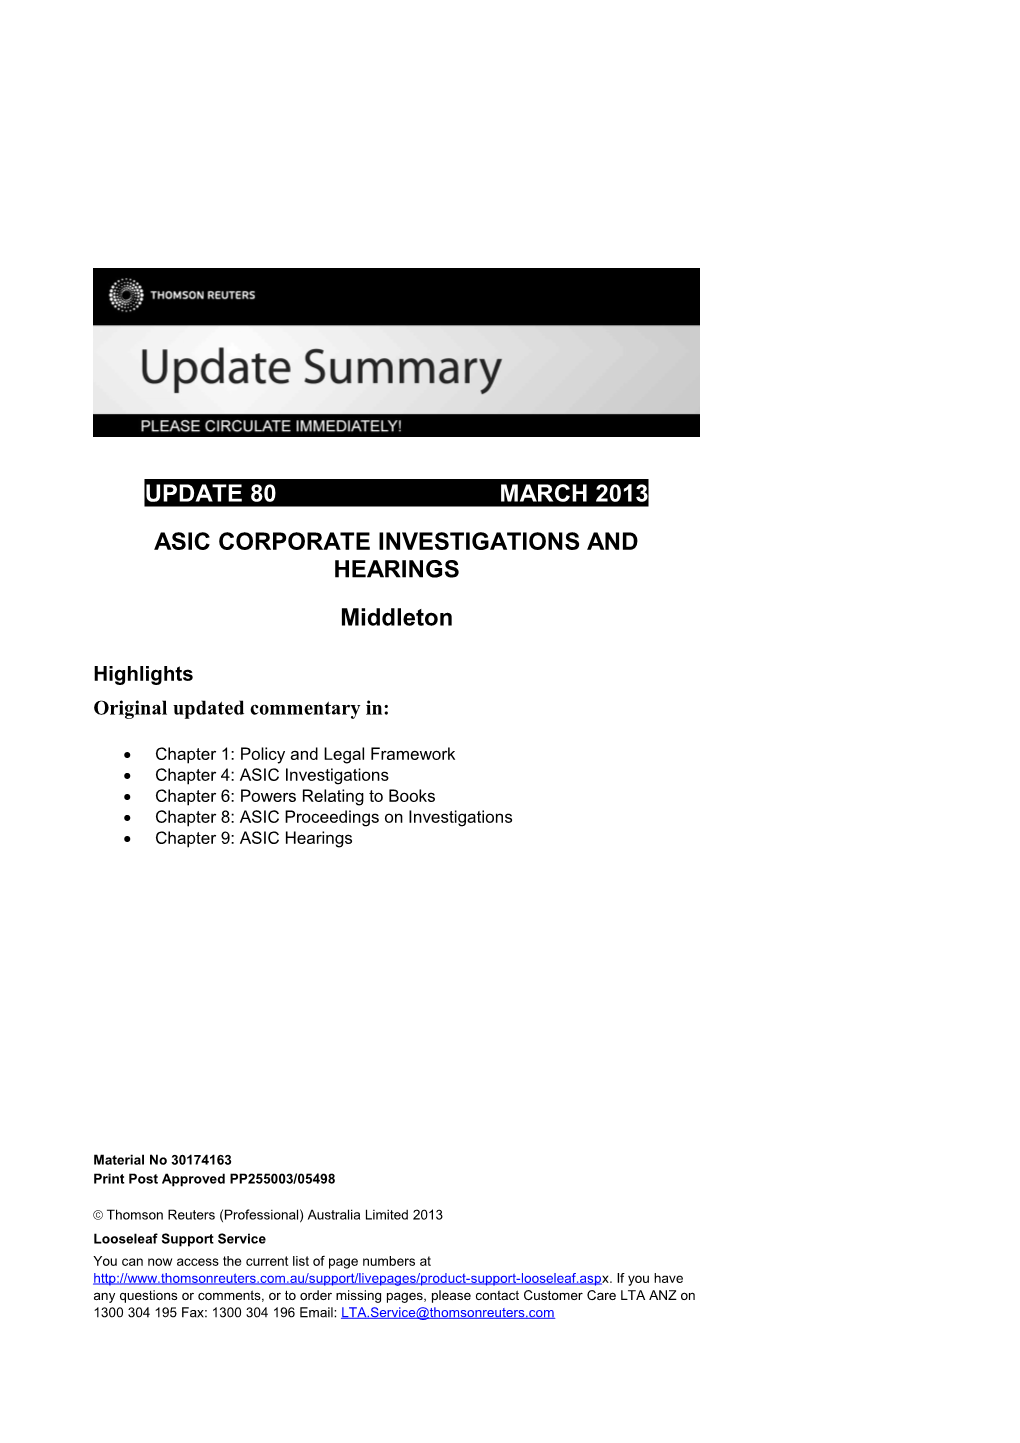 Asic Corporate Investigations and Hearings